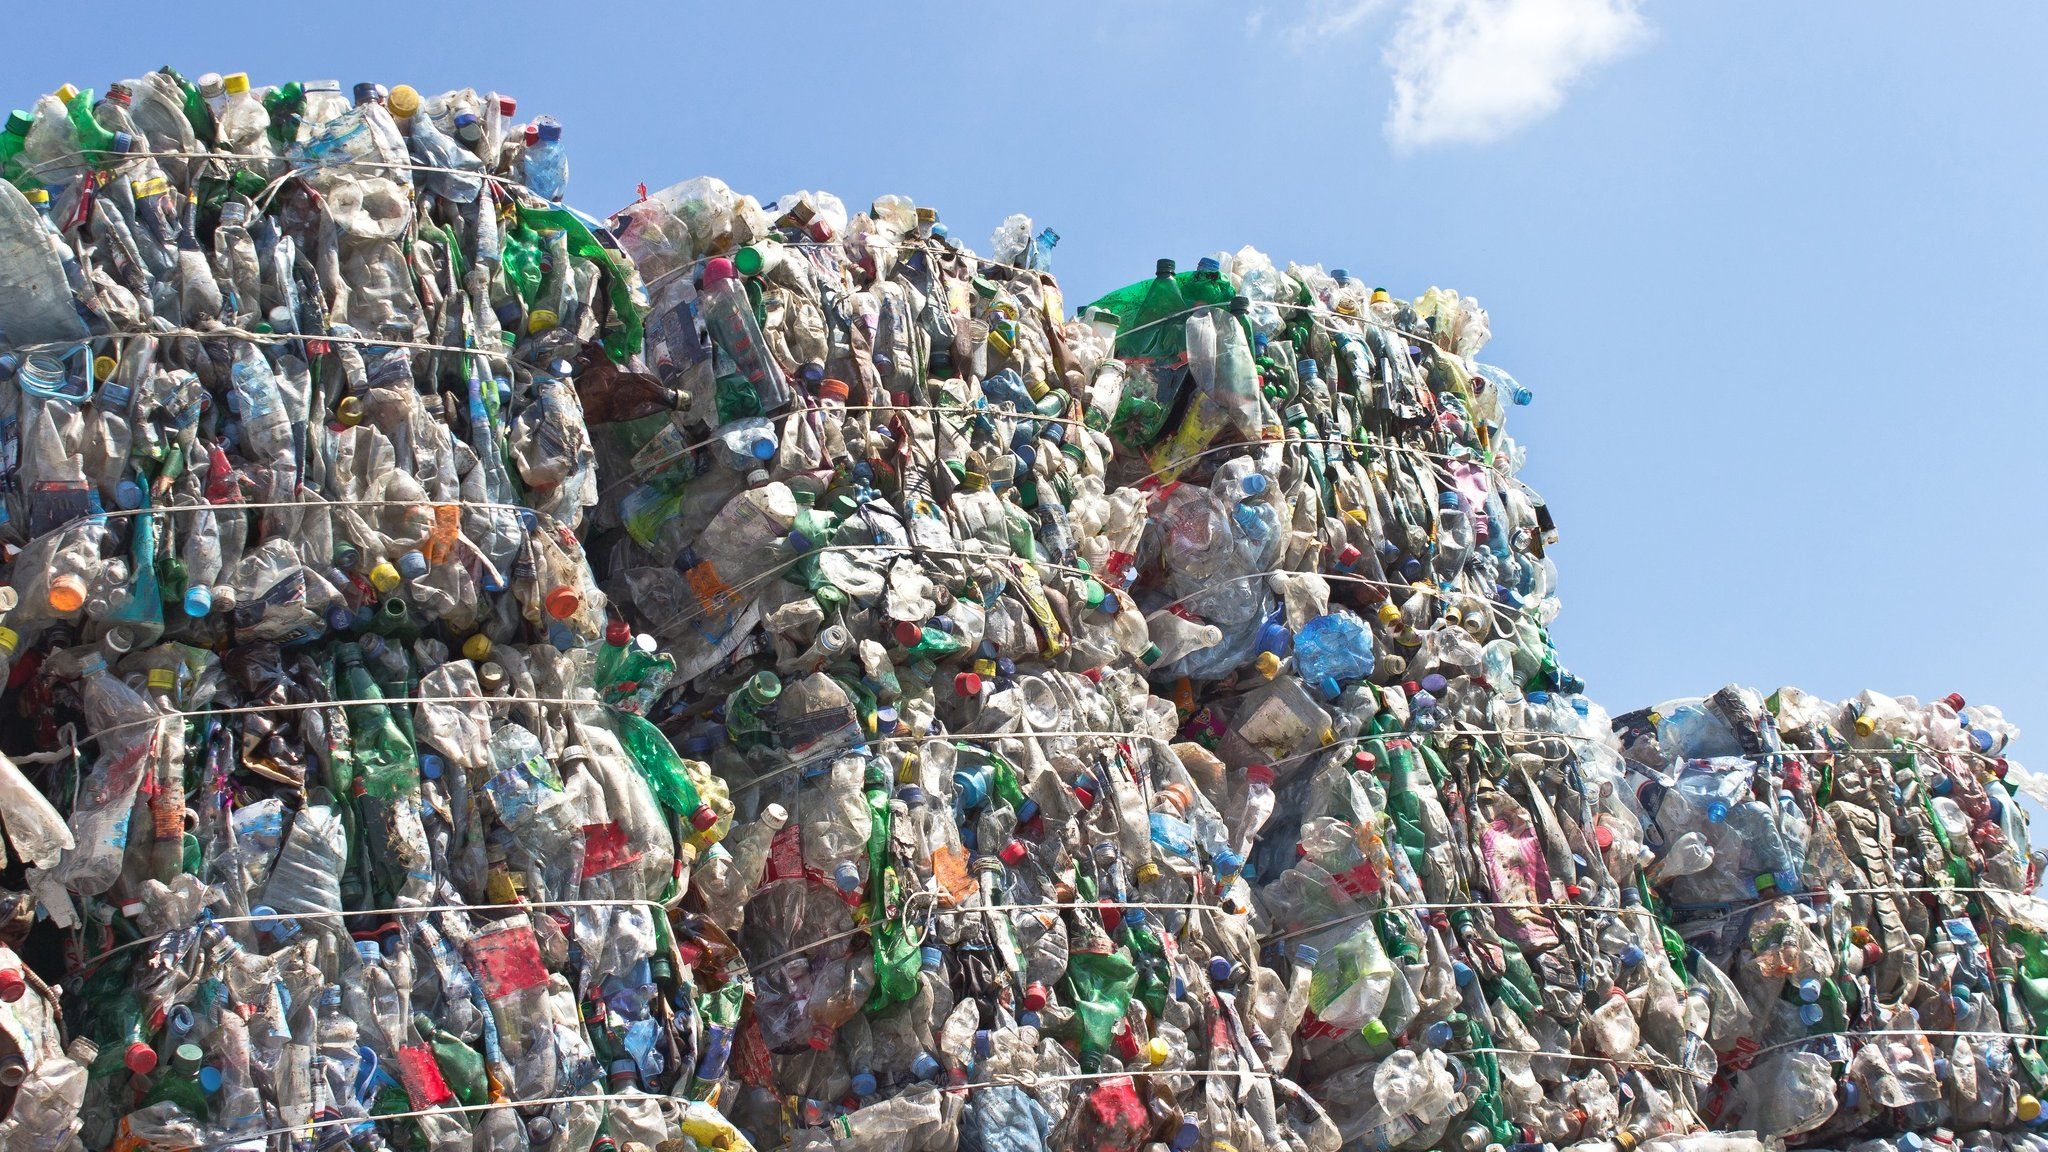 Norway recycles 97% of its plastic bottles: a blueprint for the